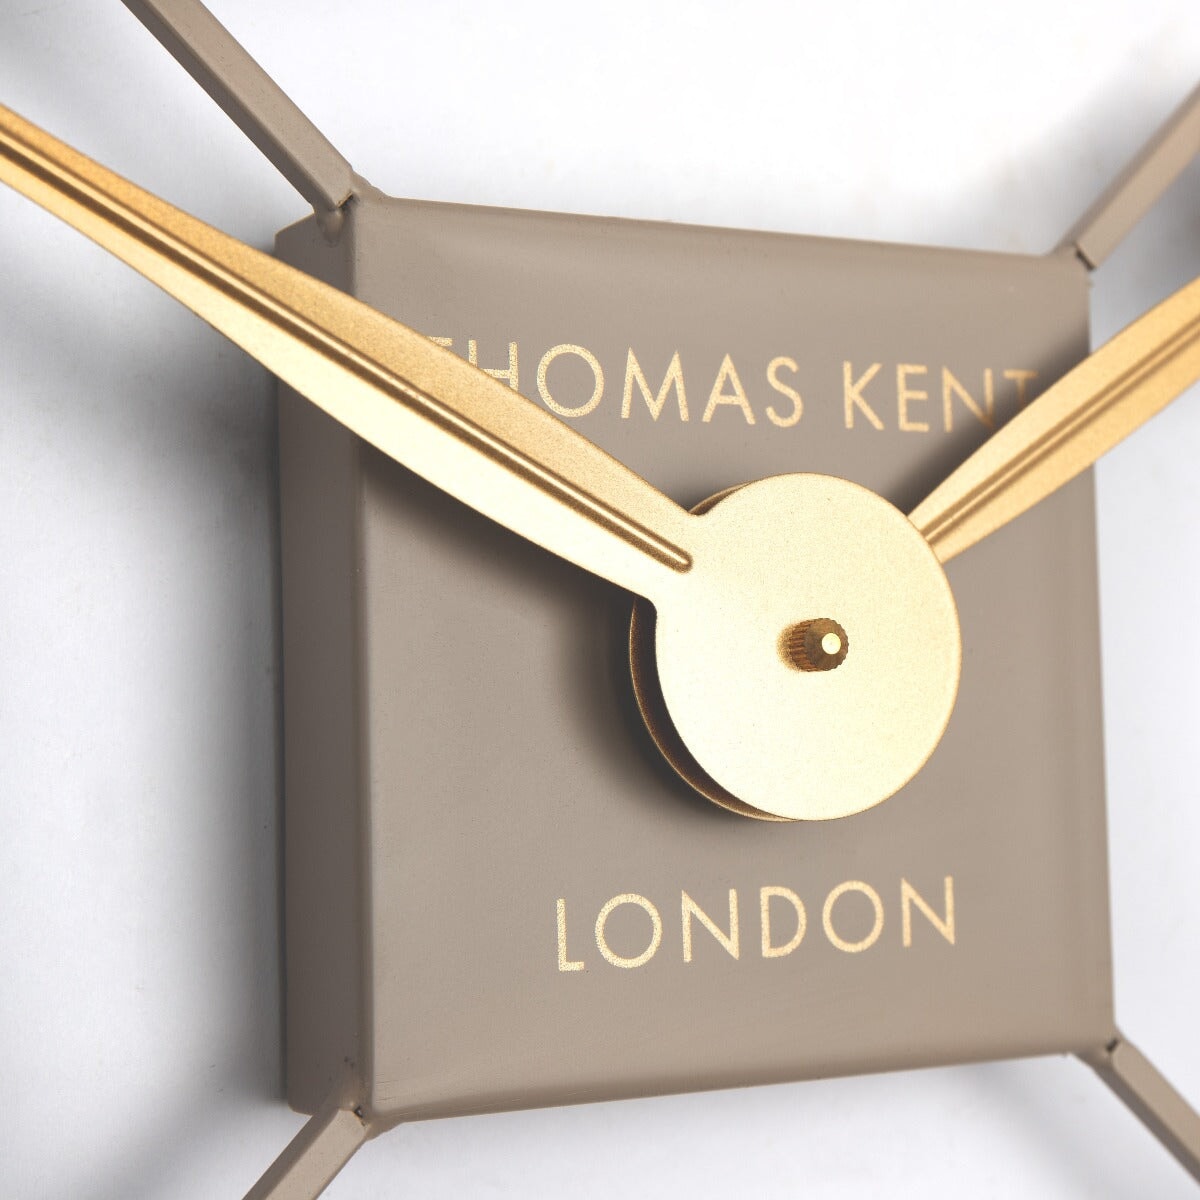 Thomas Kent London. Summer House Outdoor/Indoor Wall Clock Square Taupe - timeframedclocks